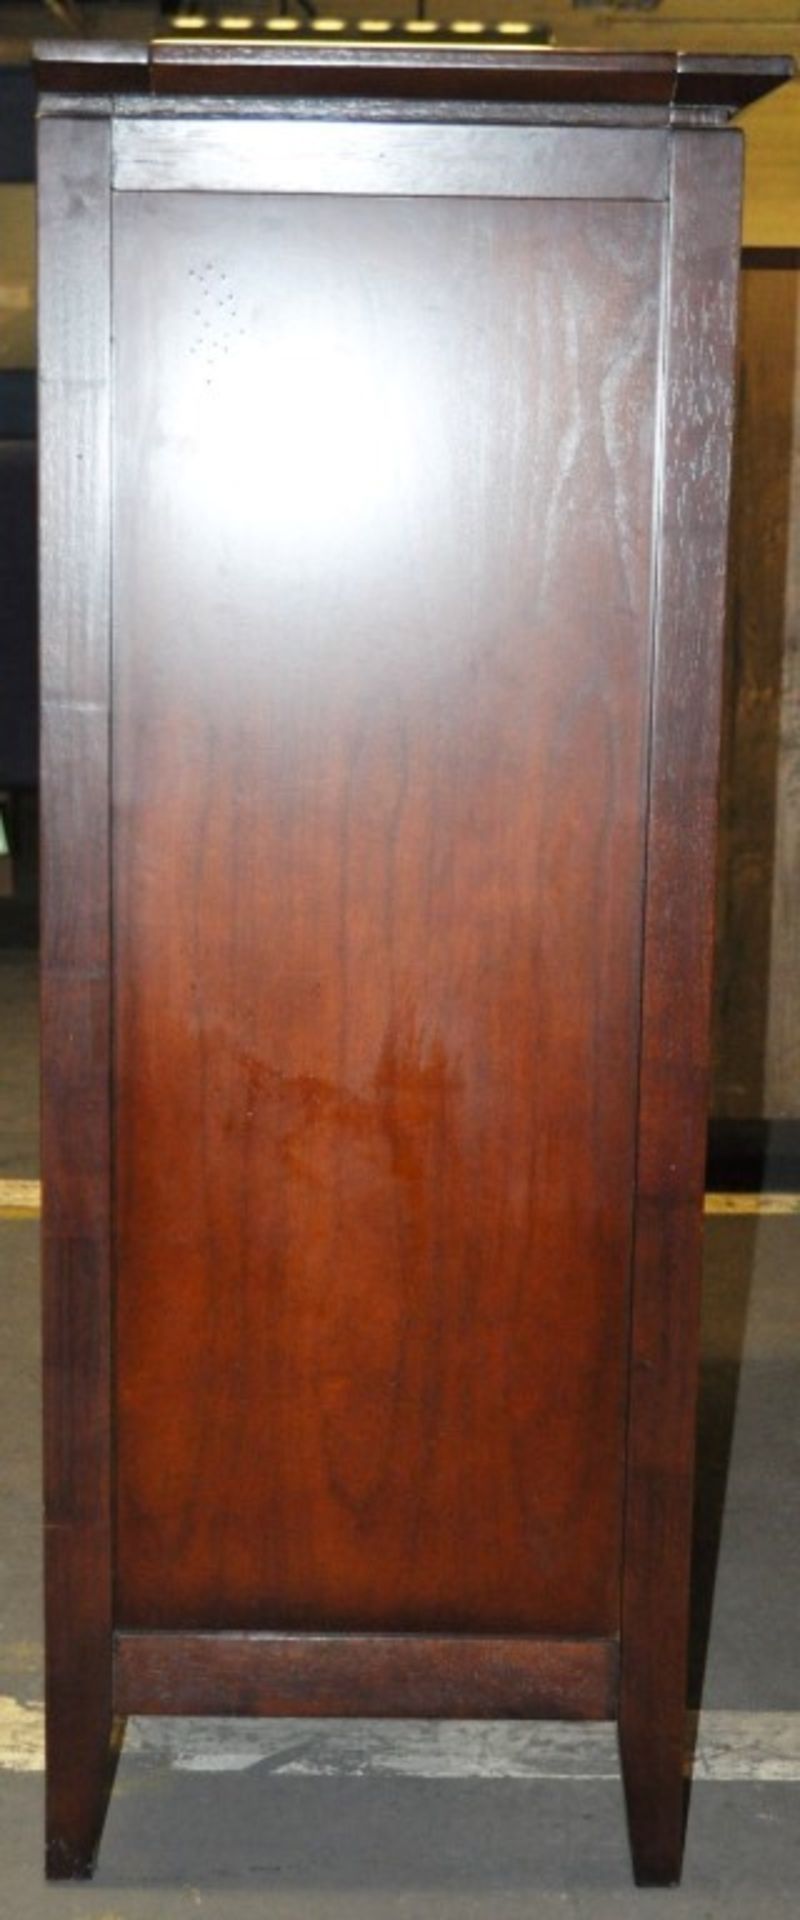 1 x Henley Traditional Red Mahogany Drinks Cabinet by Bentley Designs – Comes with Drawers & Glass - Image 7 of 7